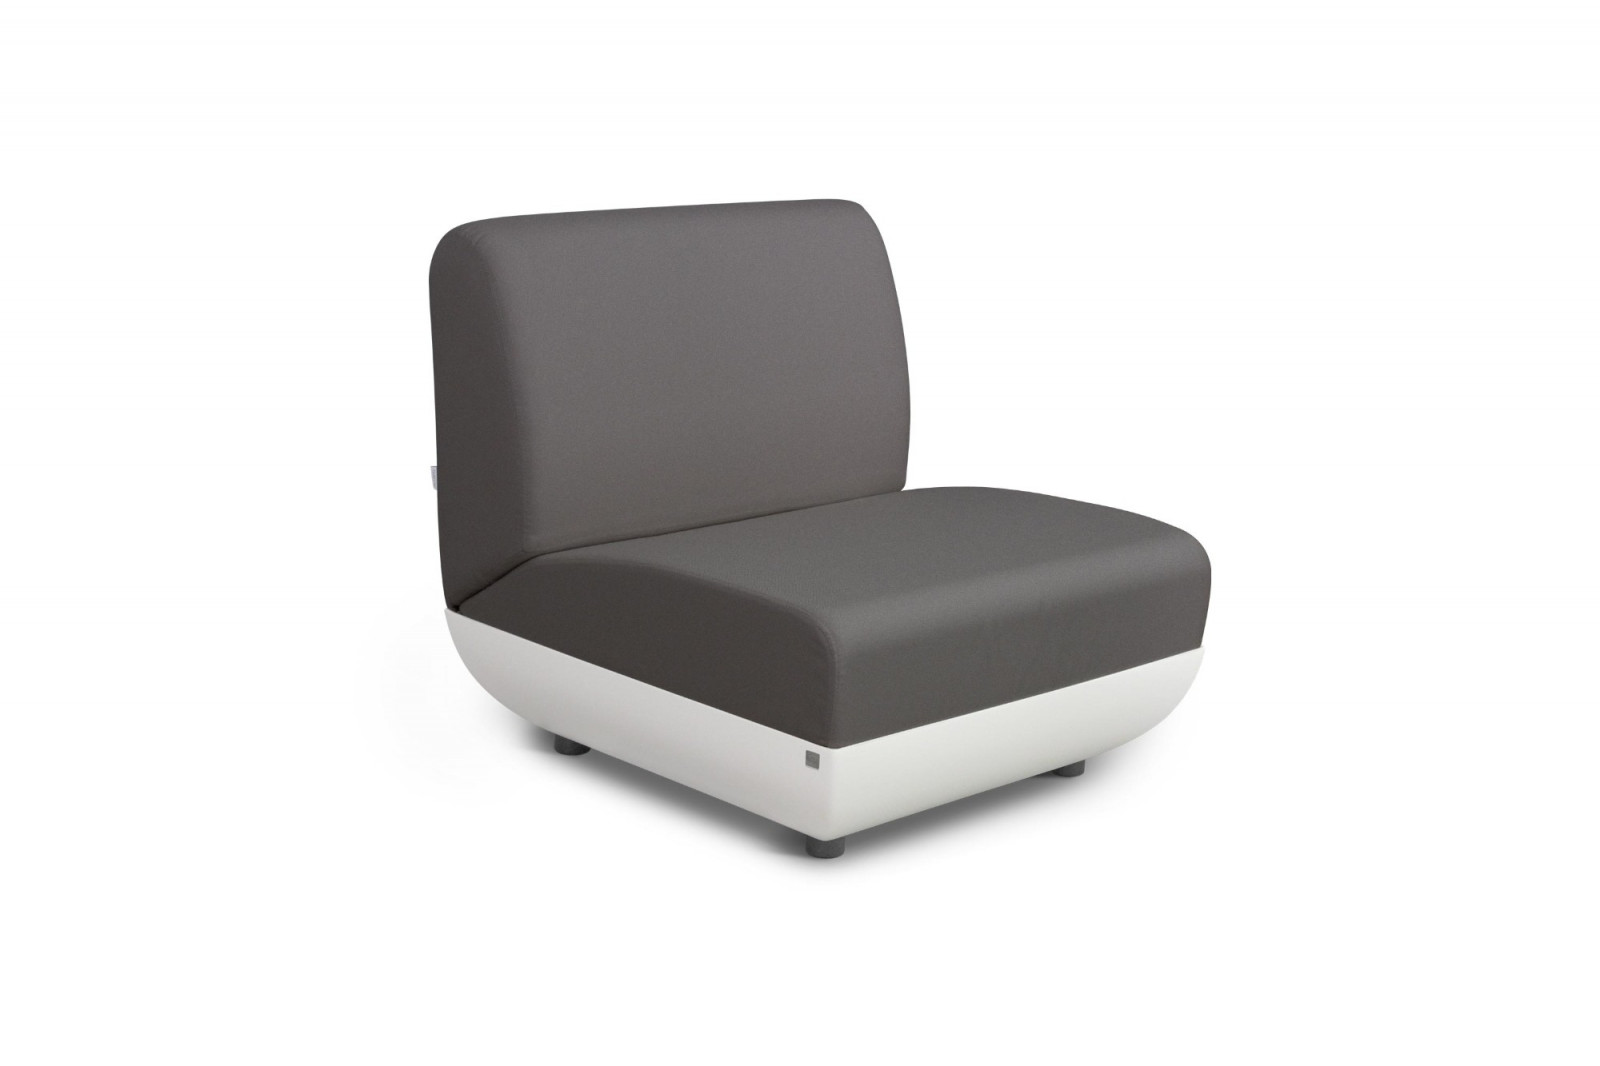 sofa-outdoor-resistant-exclusive-white-one-seat-victoria-gansk-14-2096-1600-1400-100